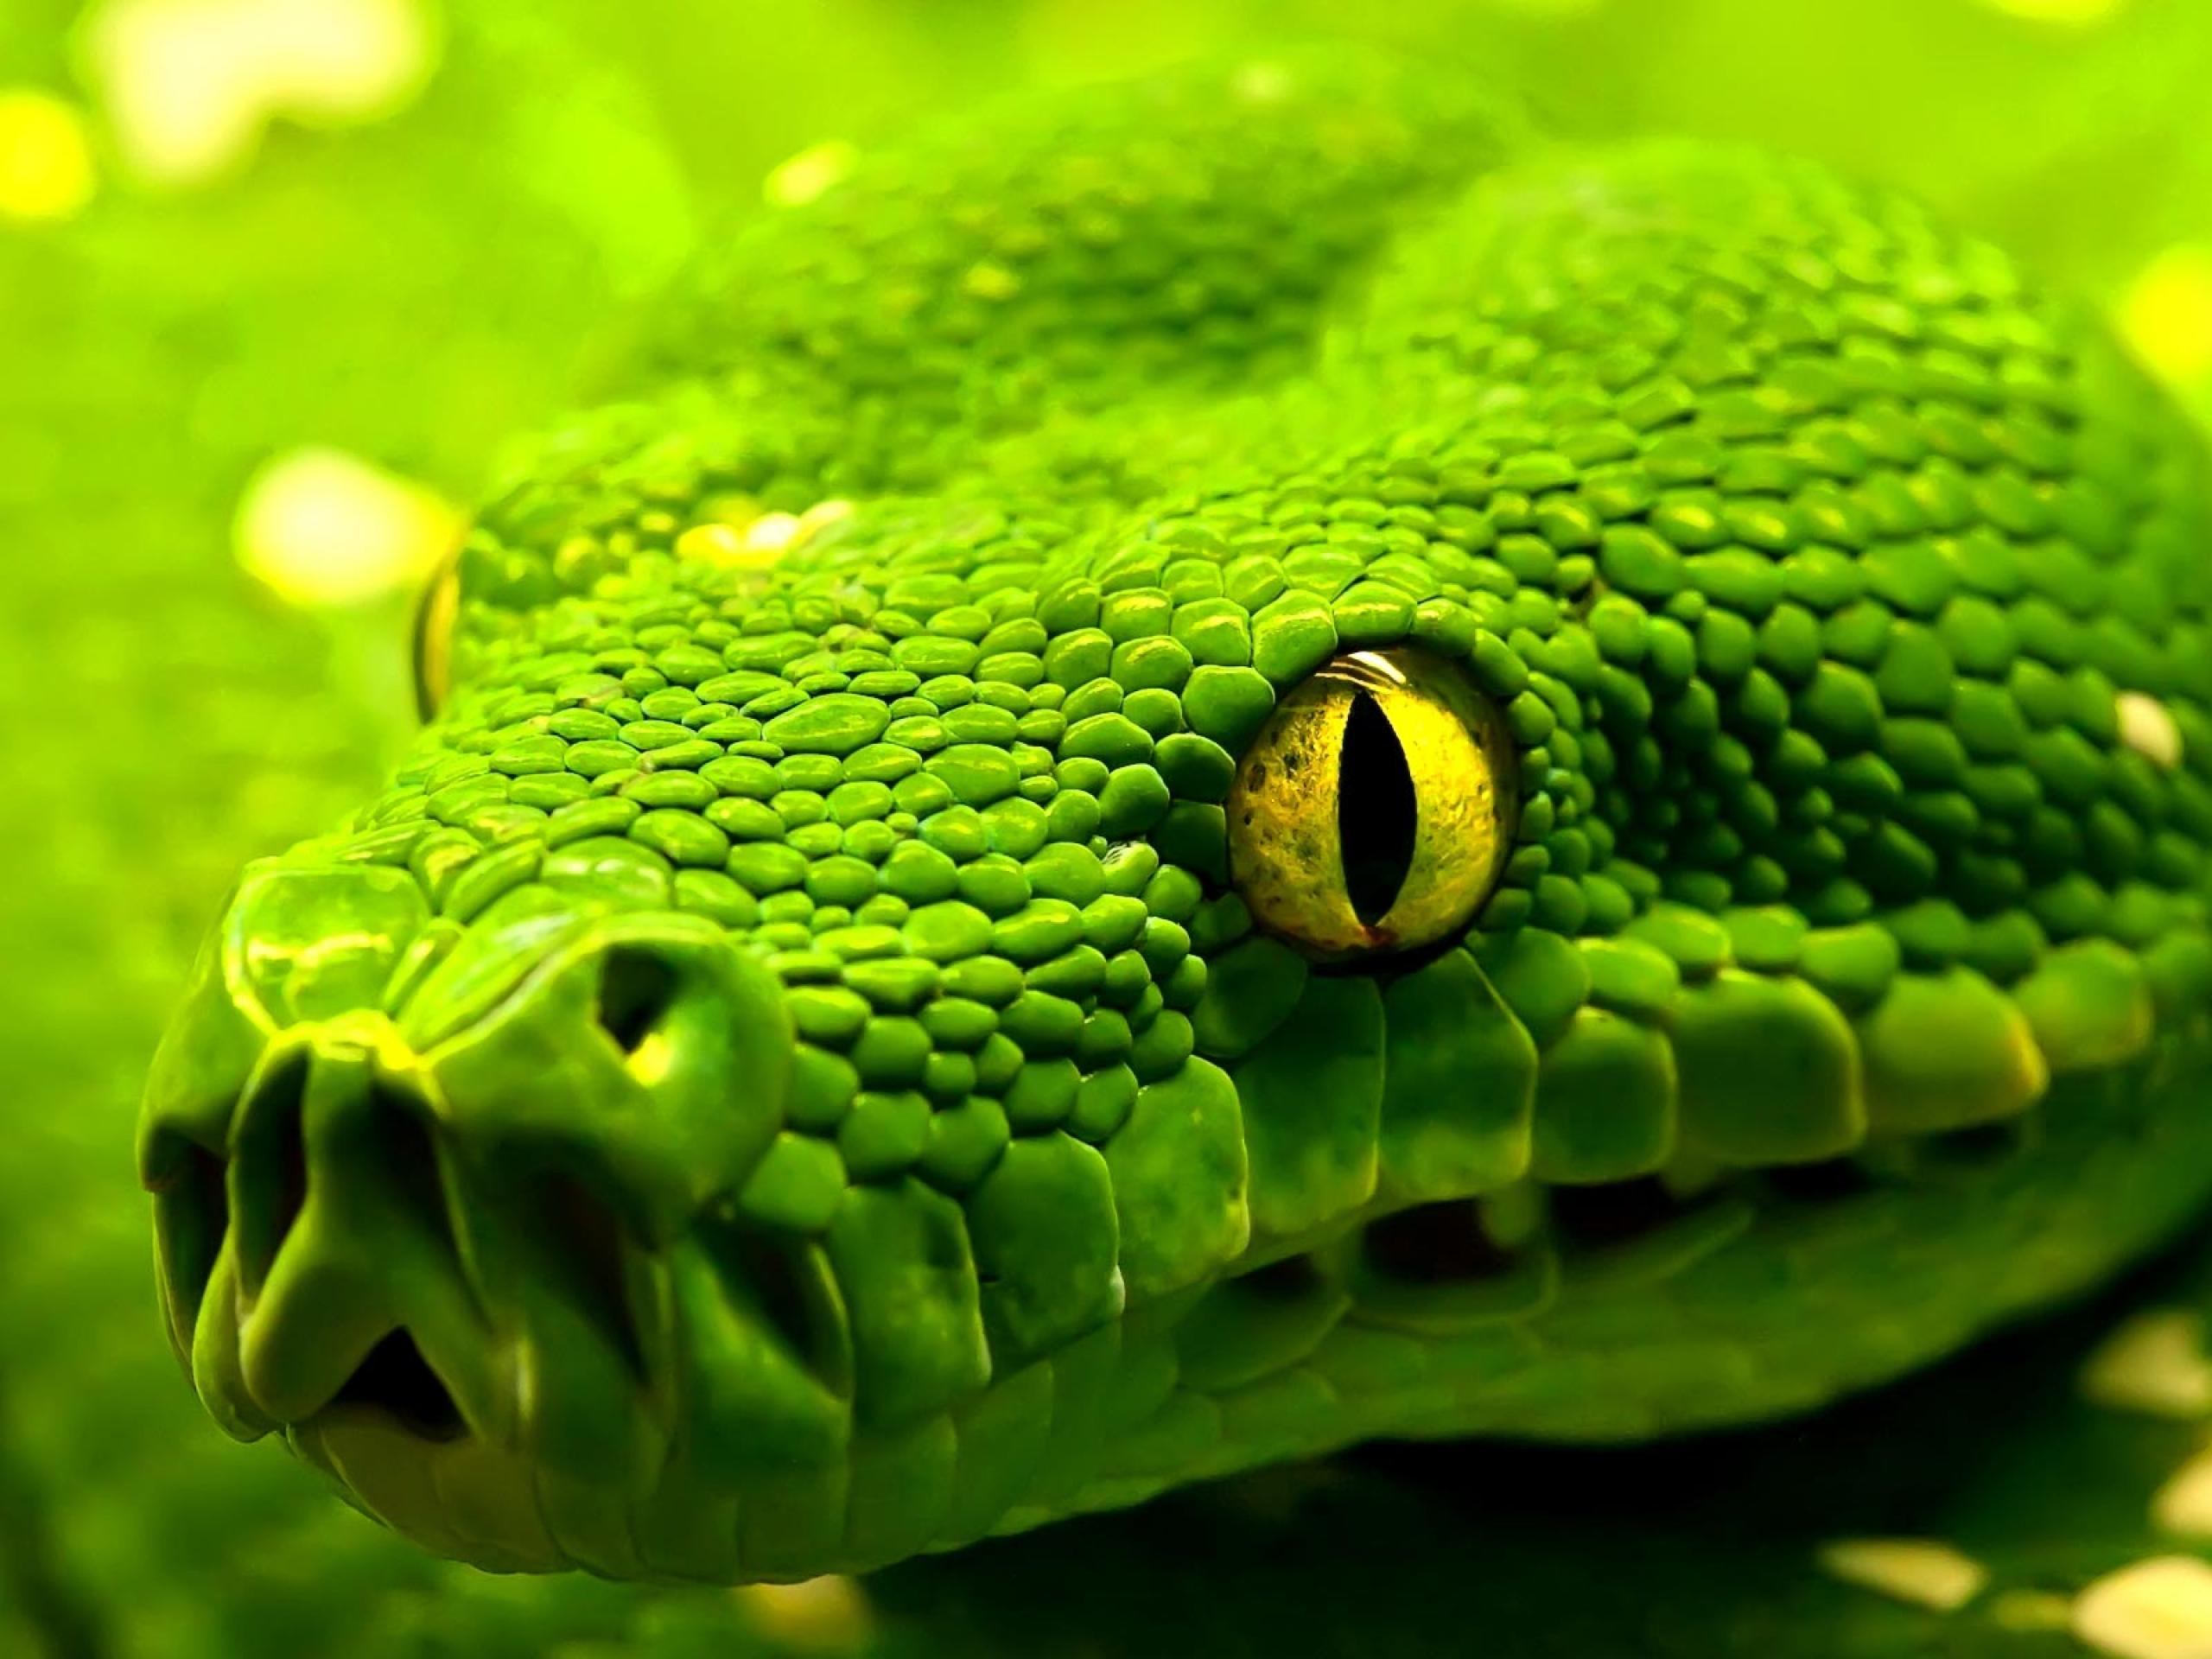 snakes images hd